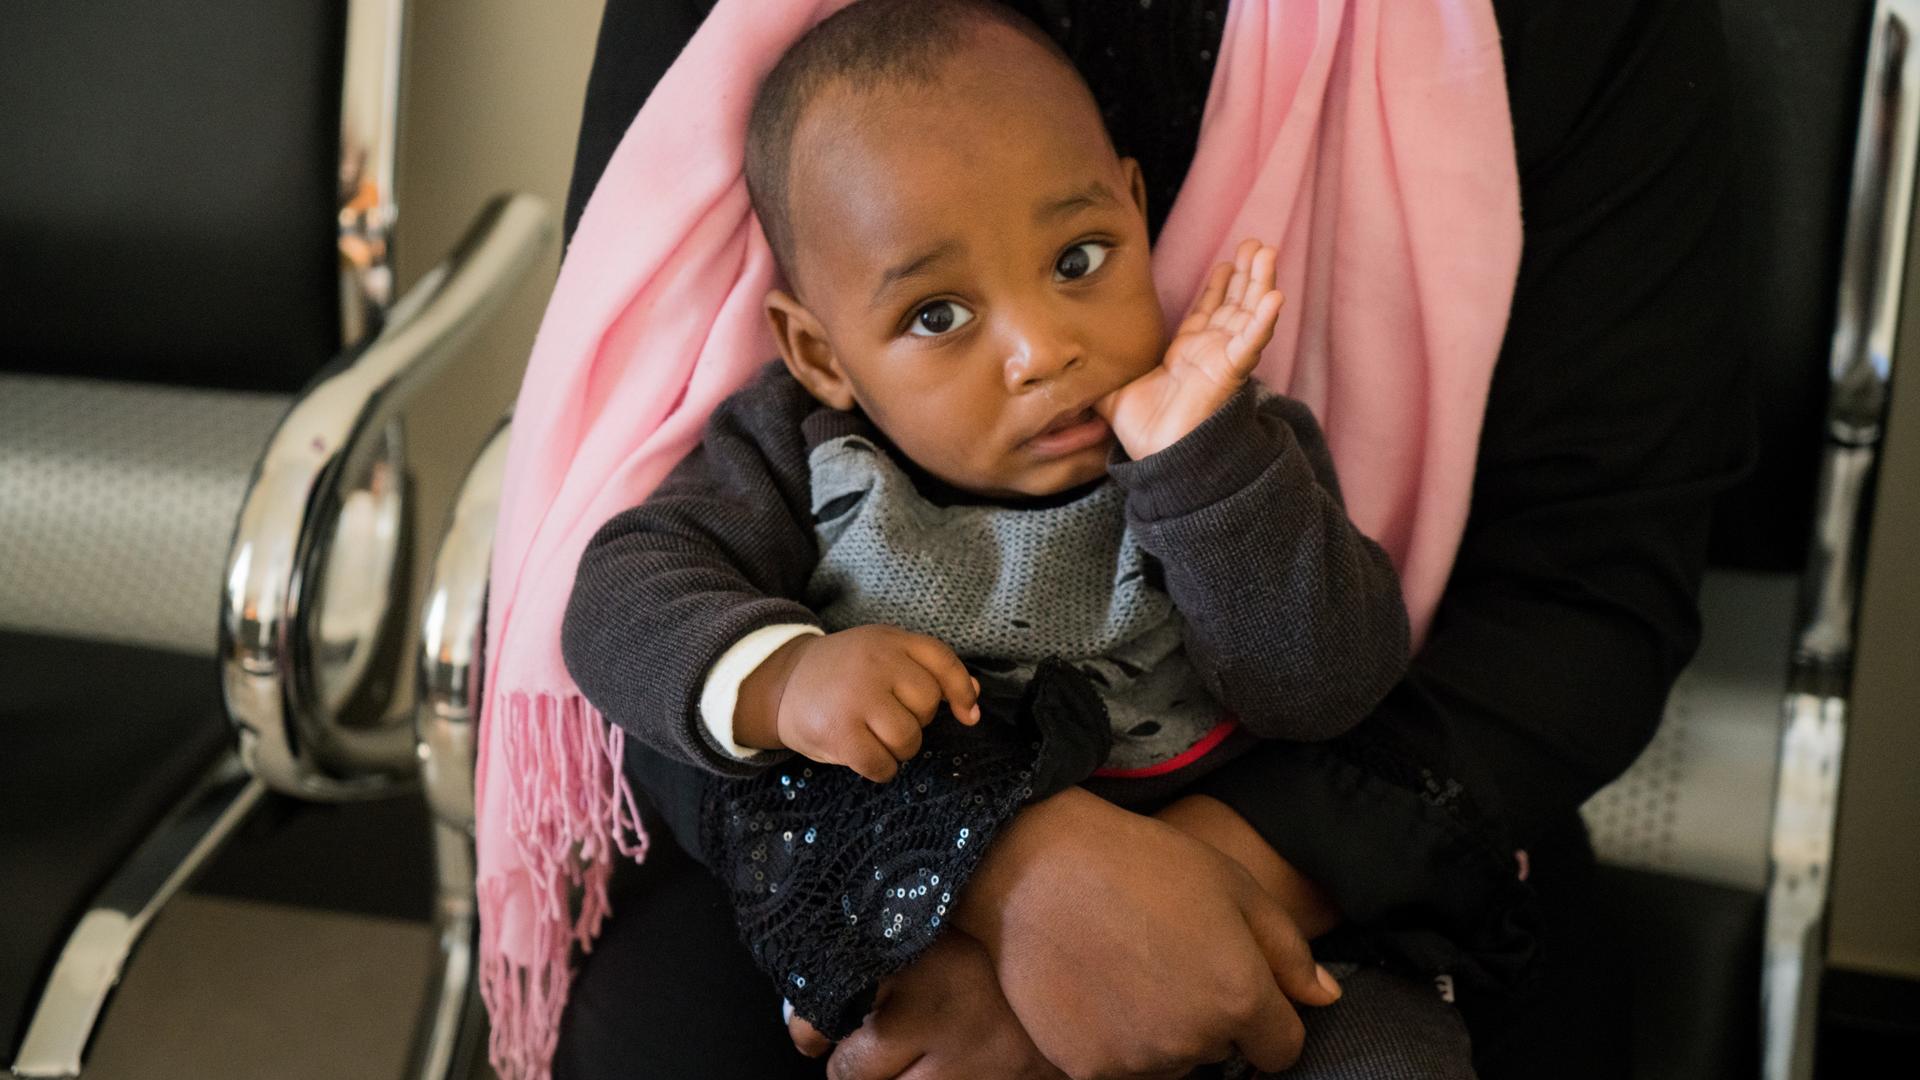 Khal, a 10-month-old boy from Eritrea, sits on his mother's lap in the Community Development Center in Tripoli, Libya